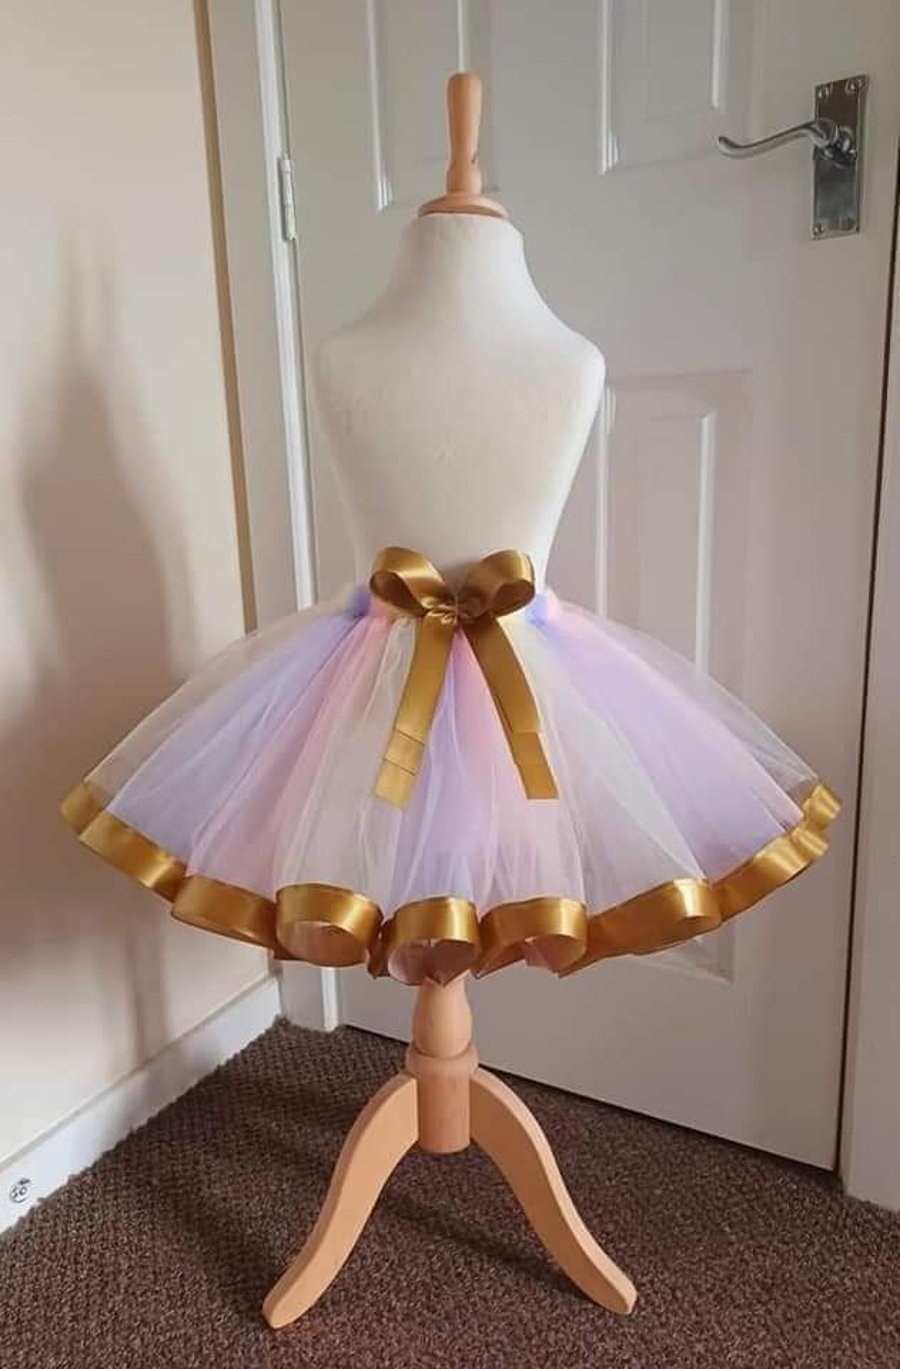 Pastel Style Tutu Skirt with Golden Trim - Ages From 0-6 Months to 6-7 Years UK 